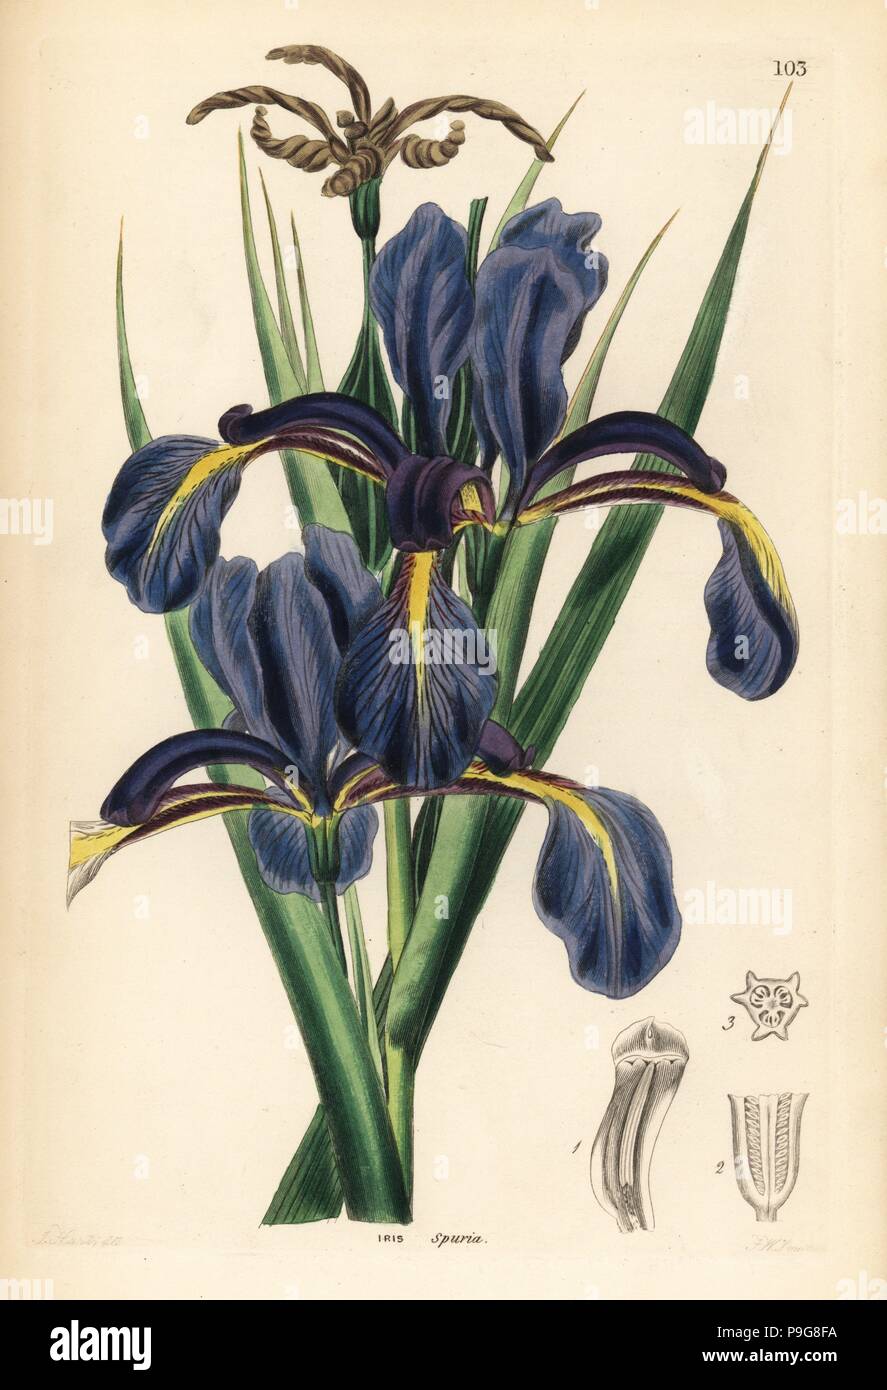 Late-flowering blue iris, Iris spuria. Handcoloured copperplate engraving by Frederick W. Smith after J.T. Hart from John Lindley and Robert Sweet's Ornamental Flower Garden and Shrubbery, G. Willis, London, 1854. Stock Photo